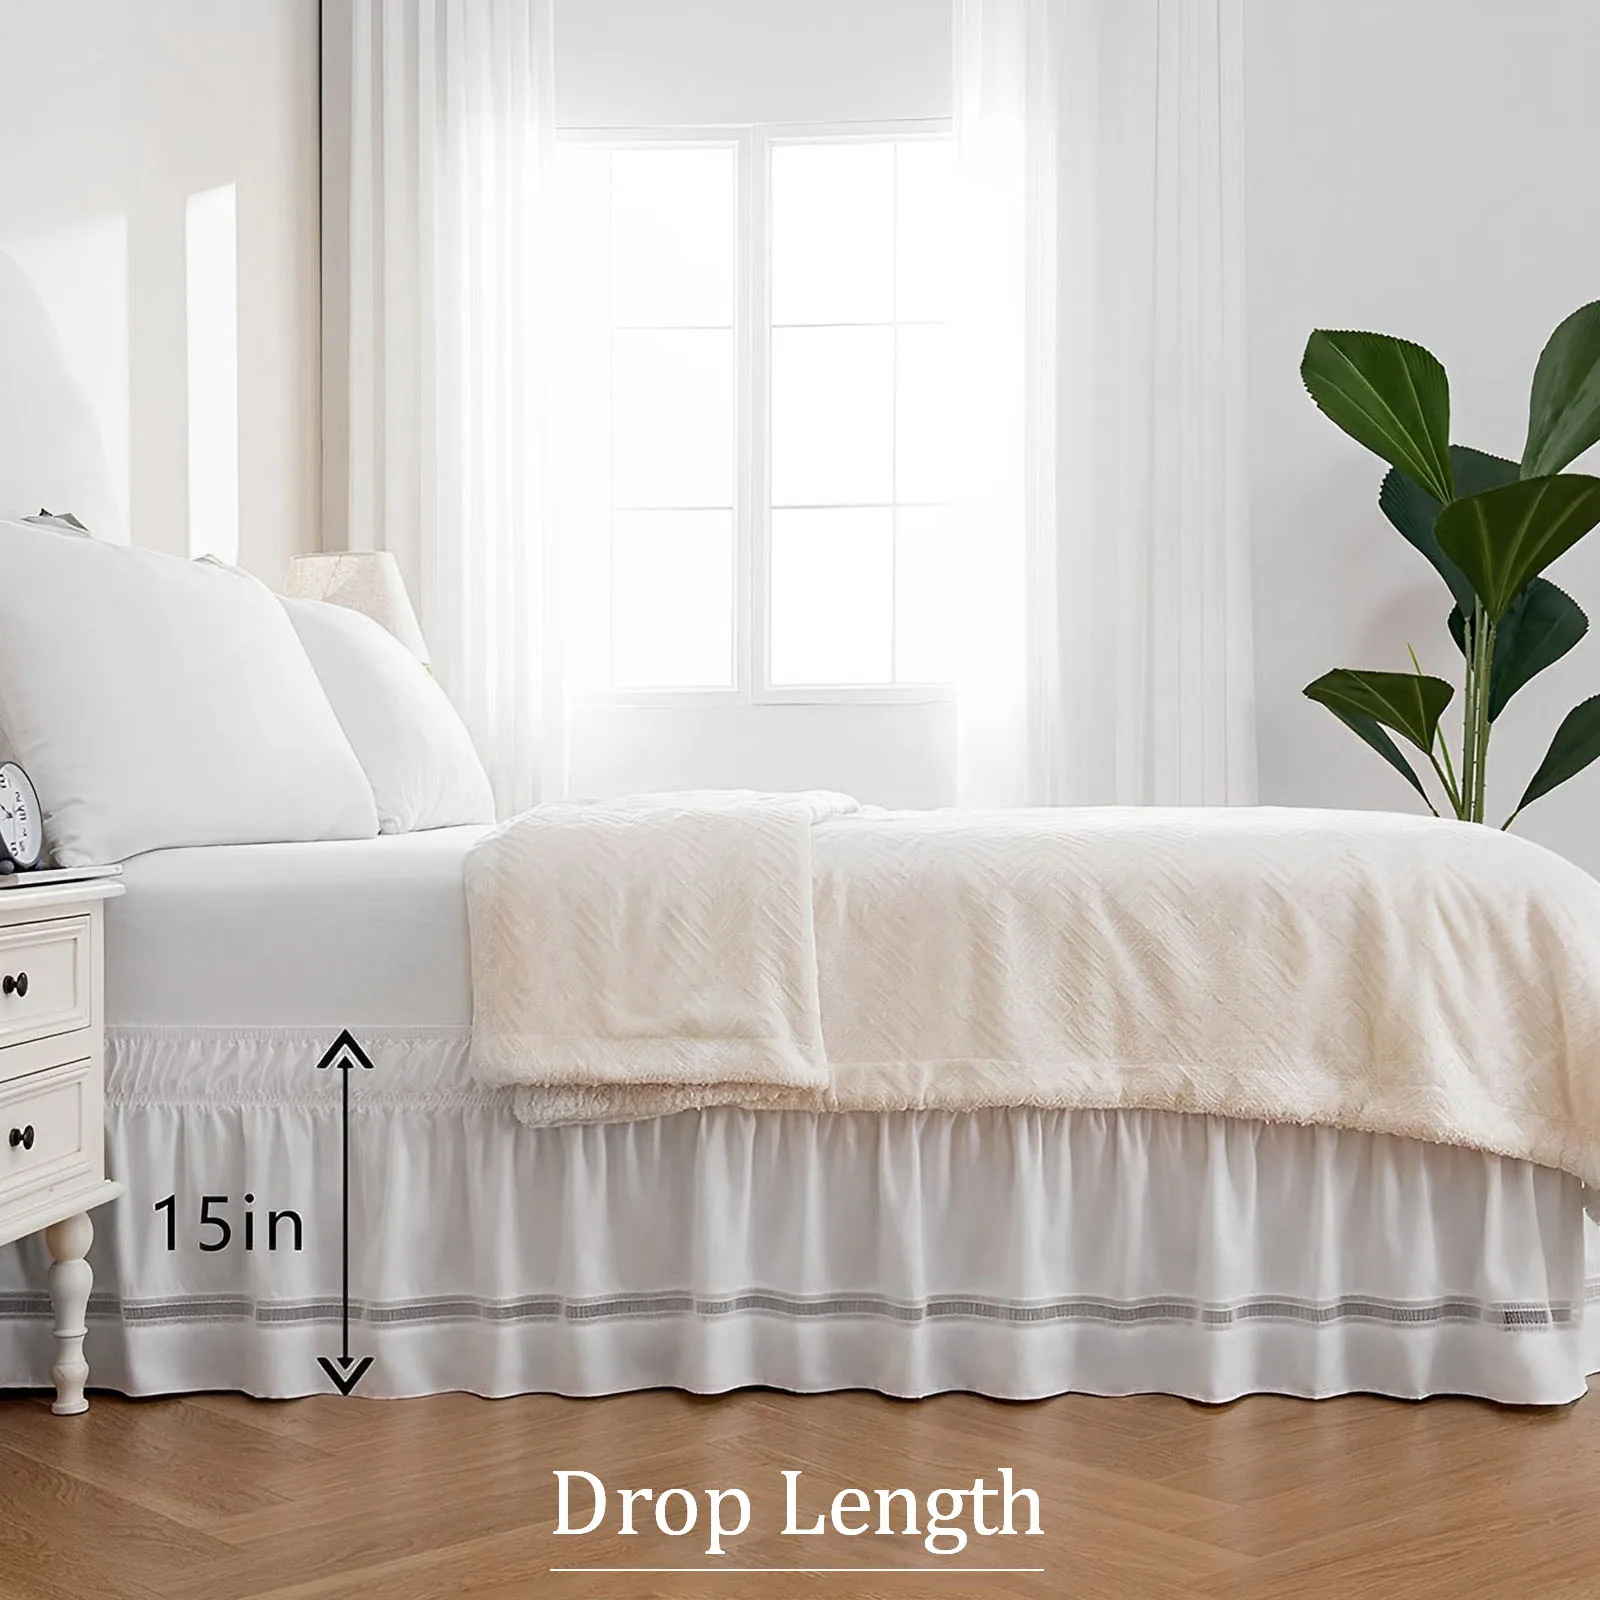 

Wrap Around Bed Skirt Elegant Ruffled Bedskirt Elastic Bands 15inch Height Fade Resistant Cover Bed Skirt Machine Washable Beds